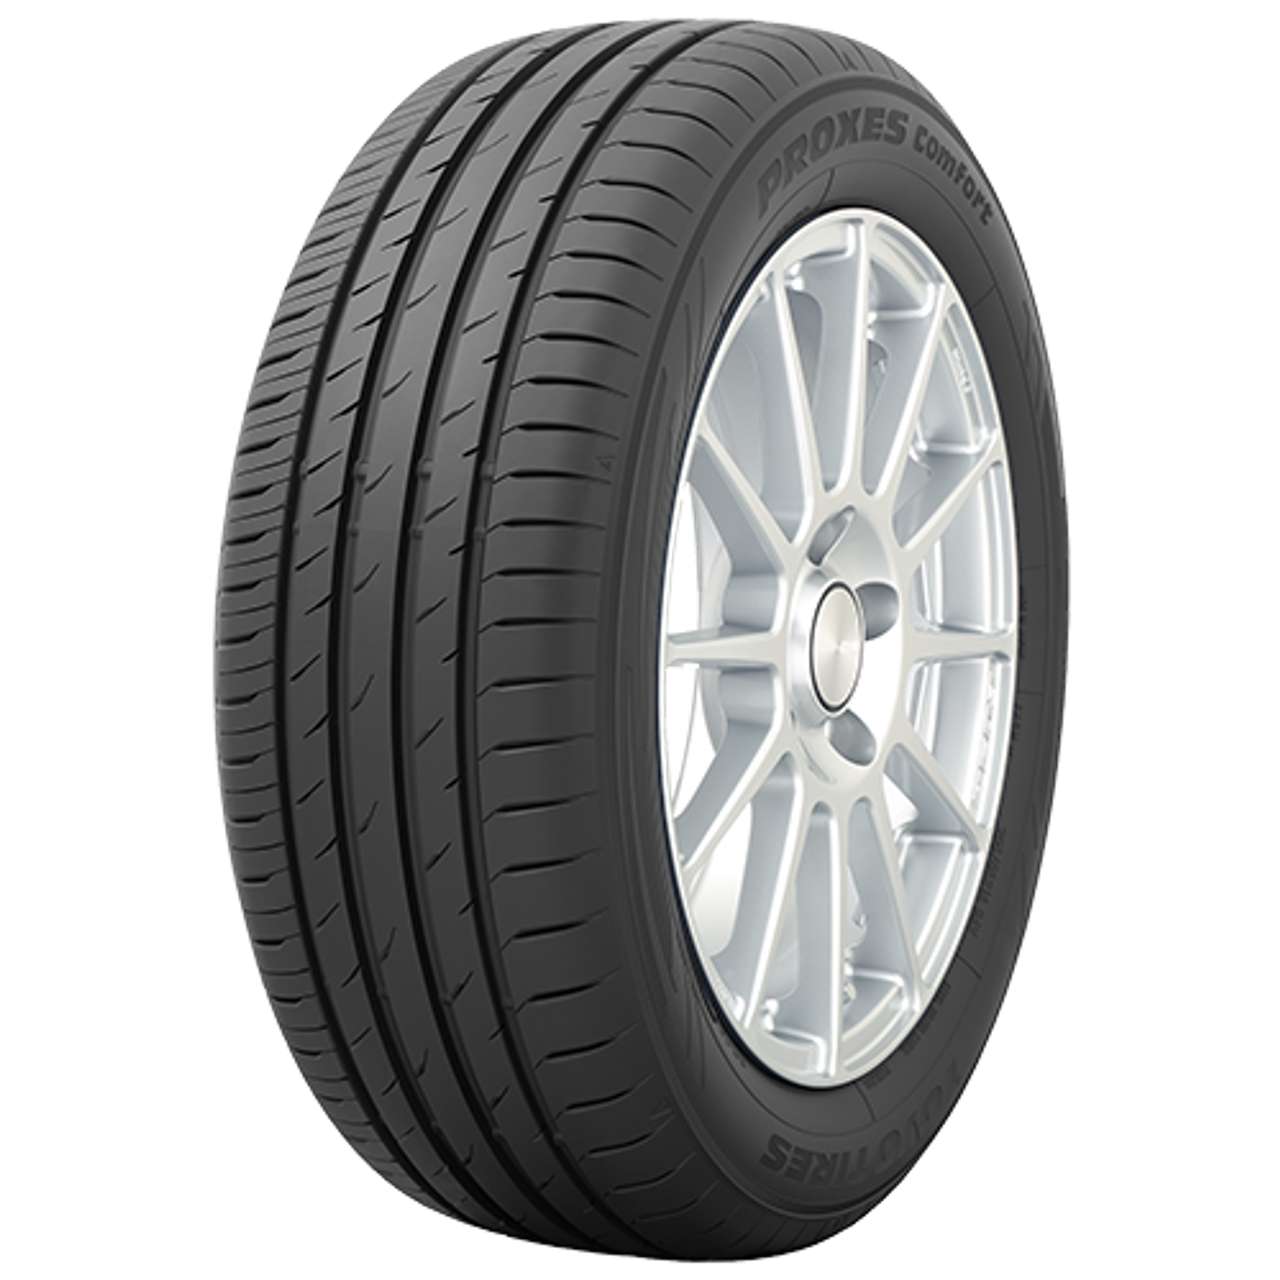 TOYO PROXES COMFORT 185/60R14 82H BSW